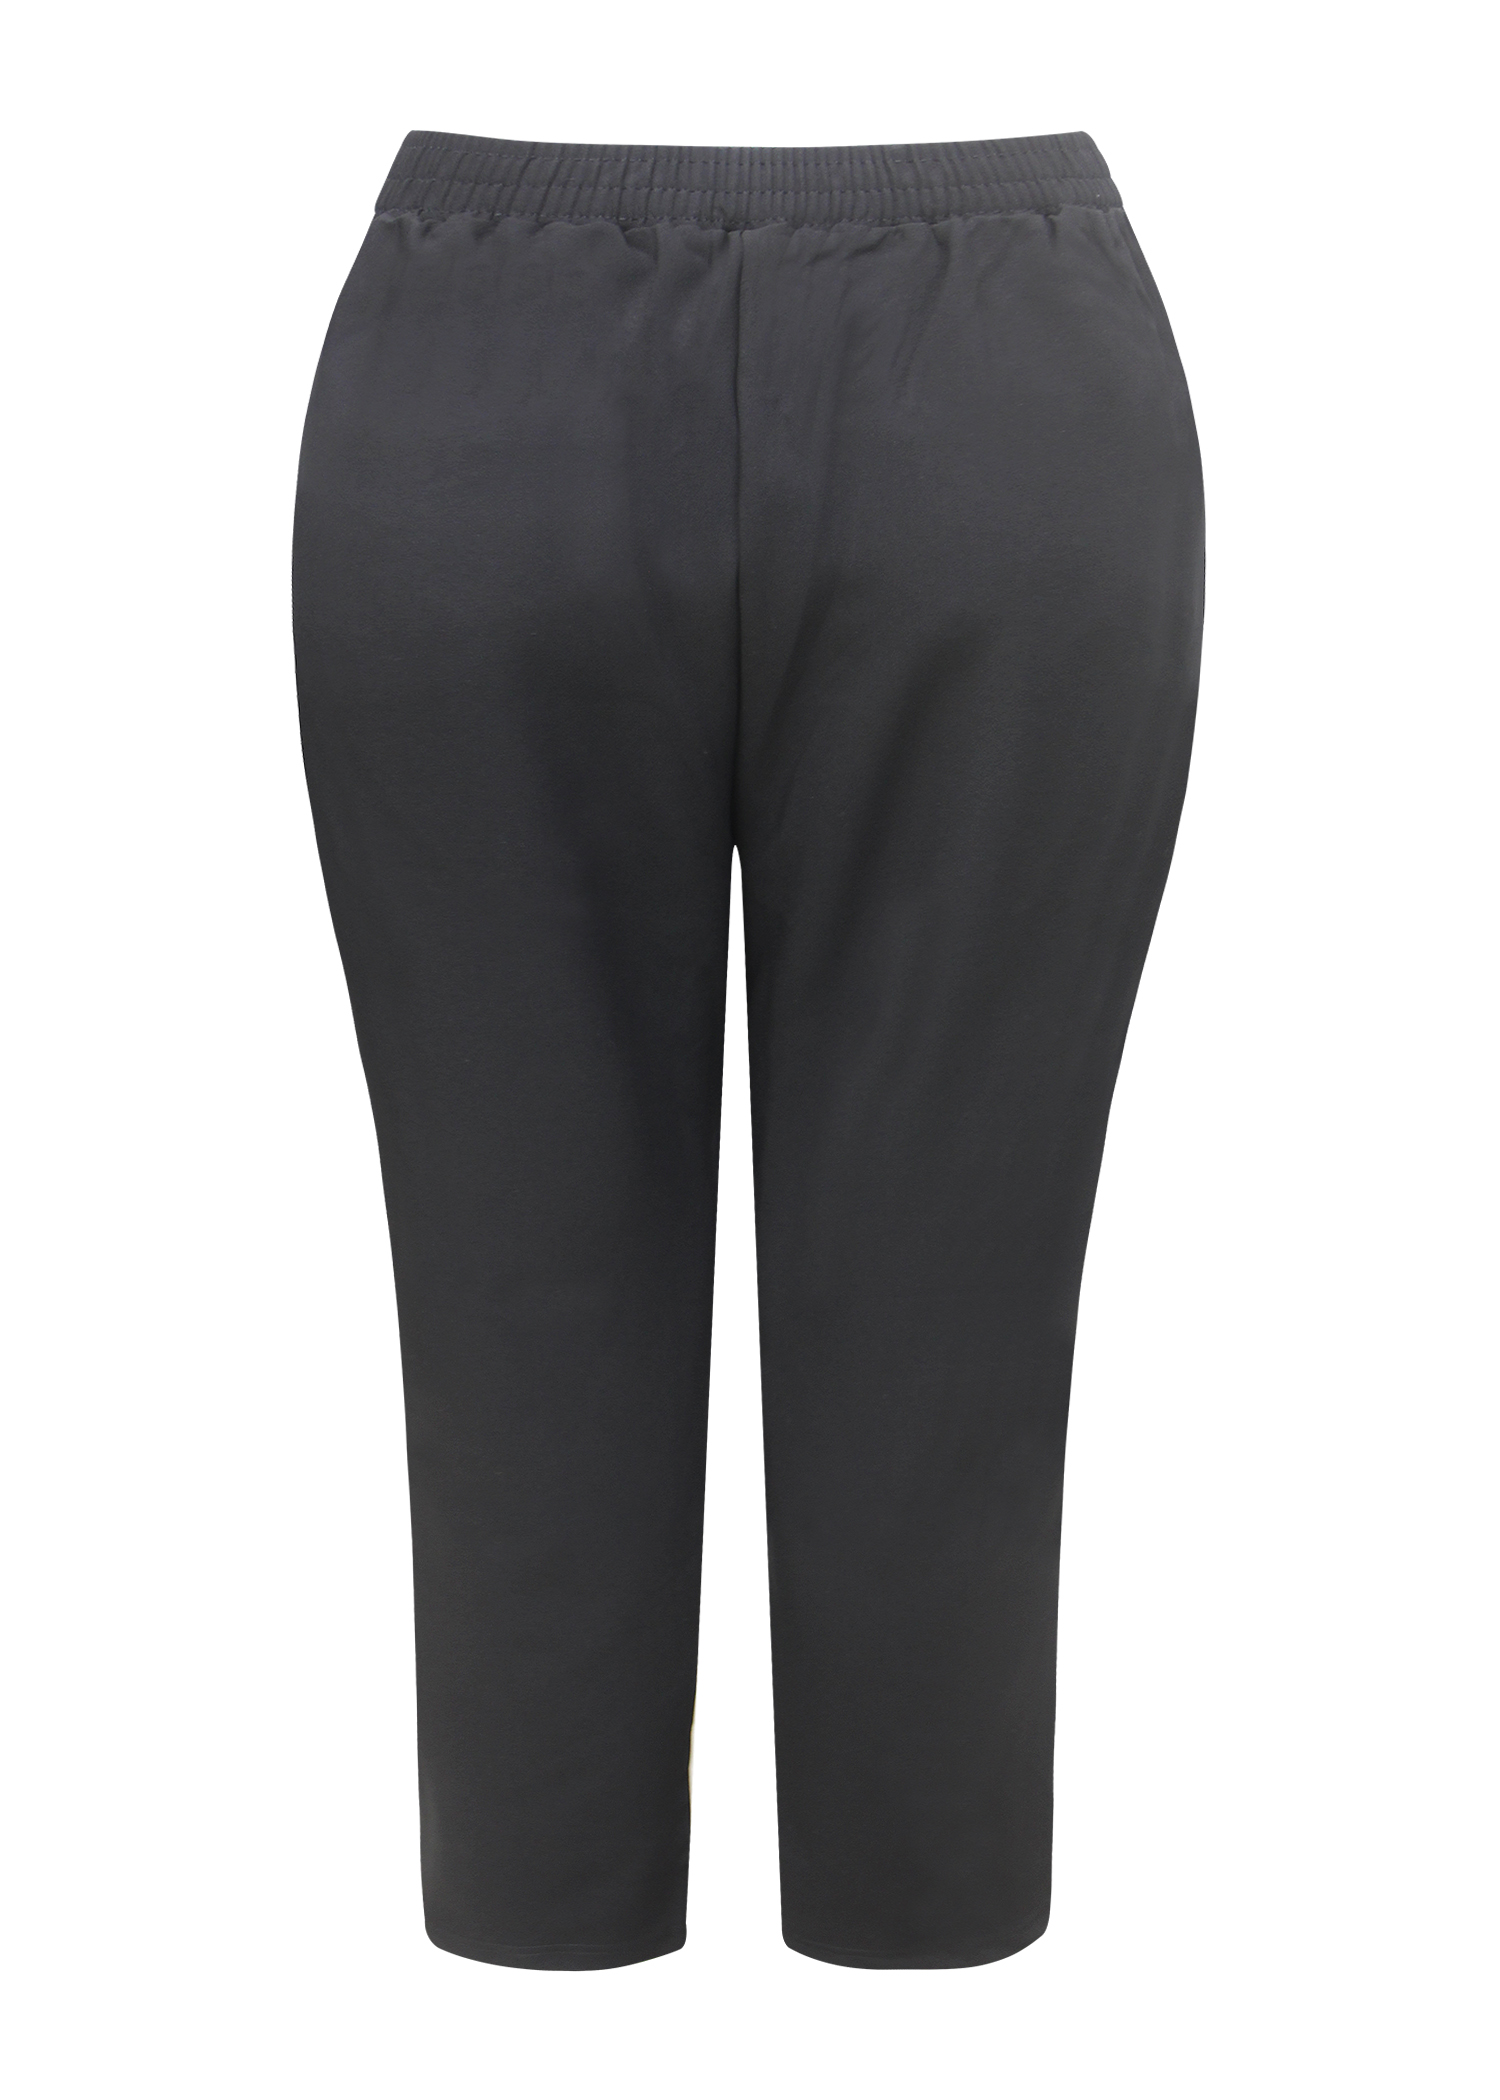 Buy Black Trousers & Pants for Women by Magre Online | Ajio.com-baongoctrading.com.vn